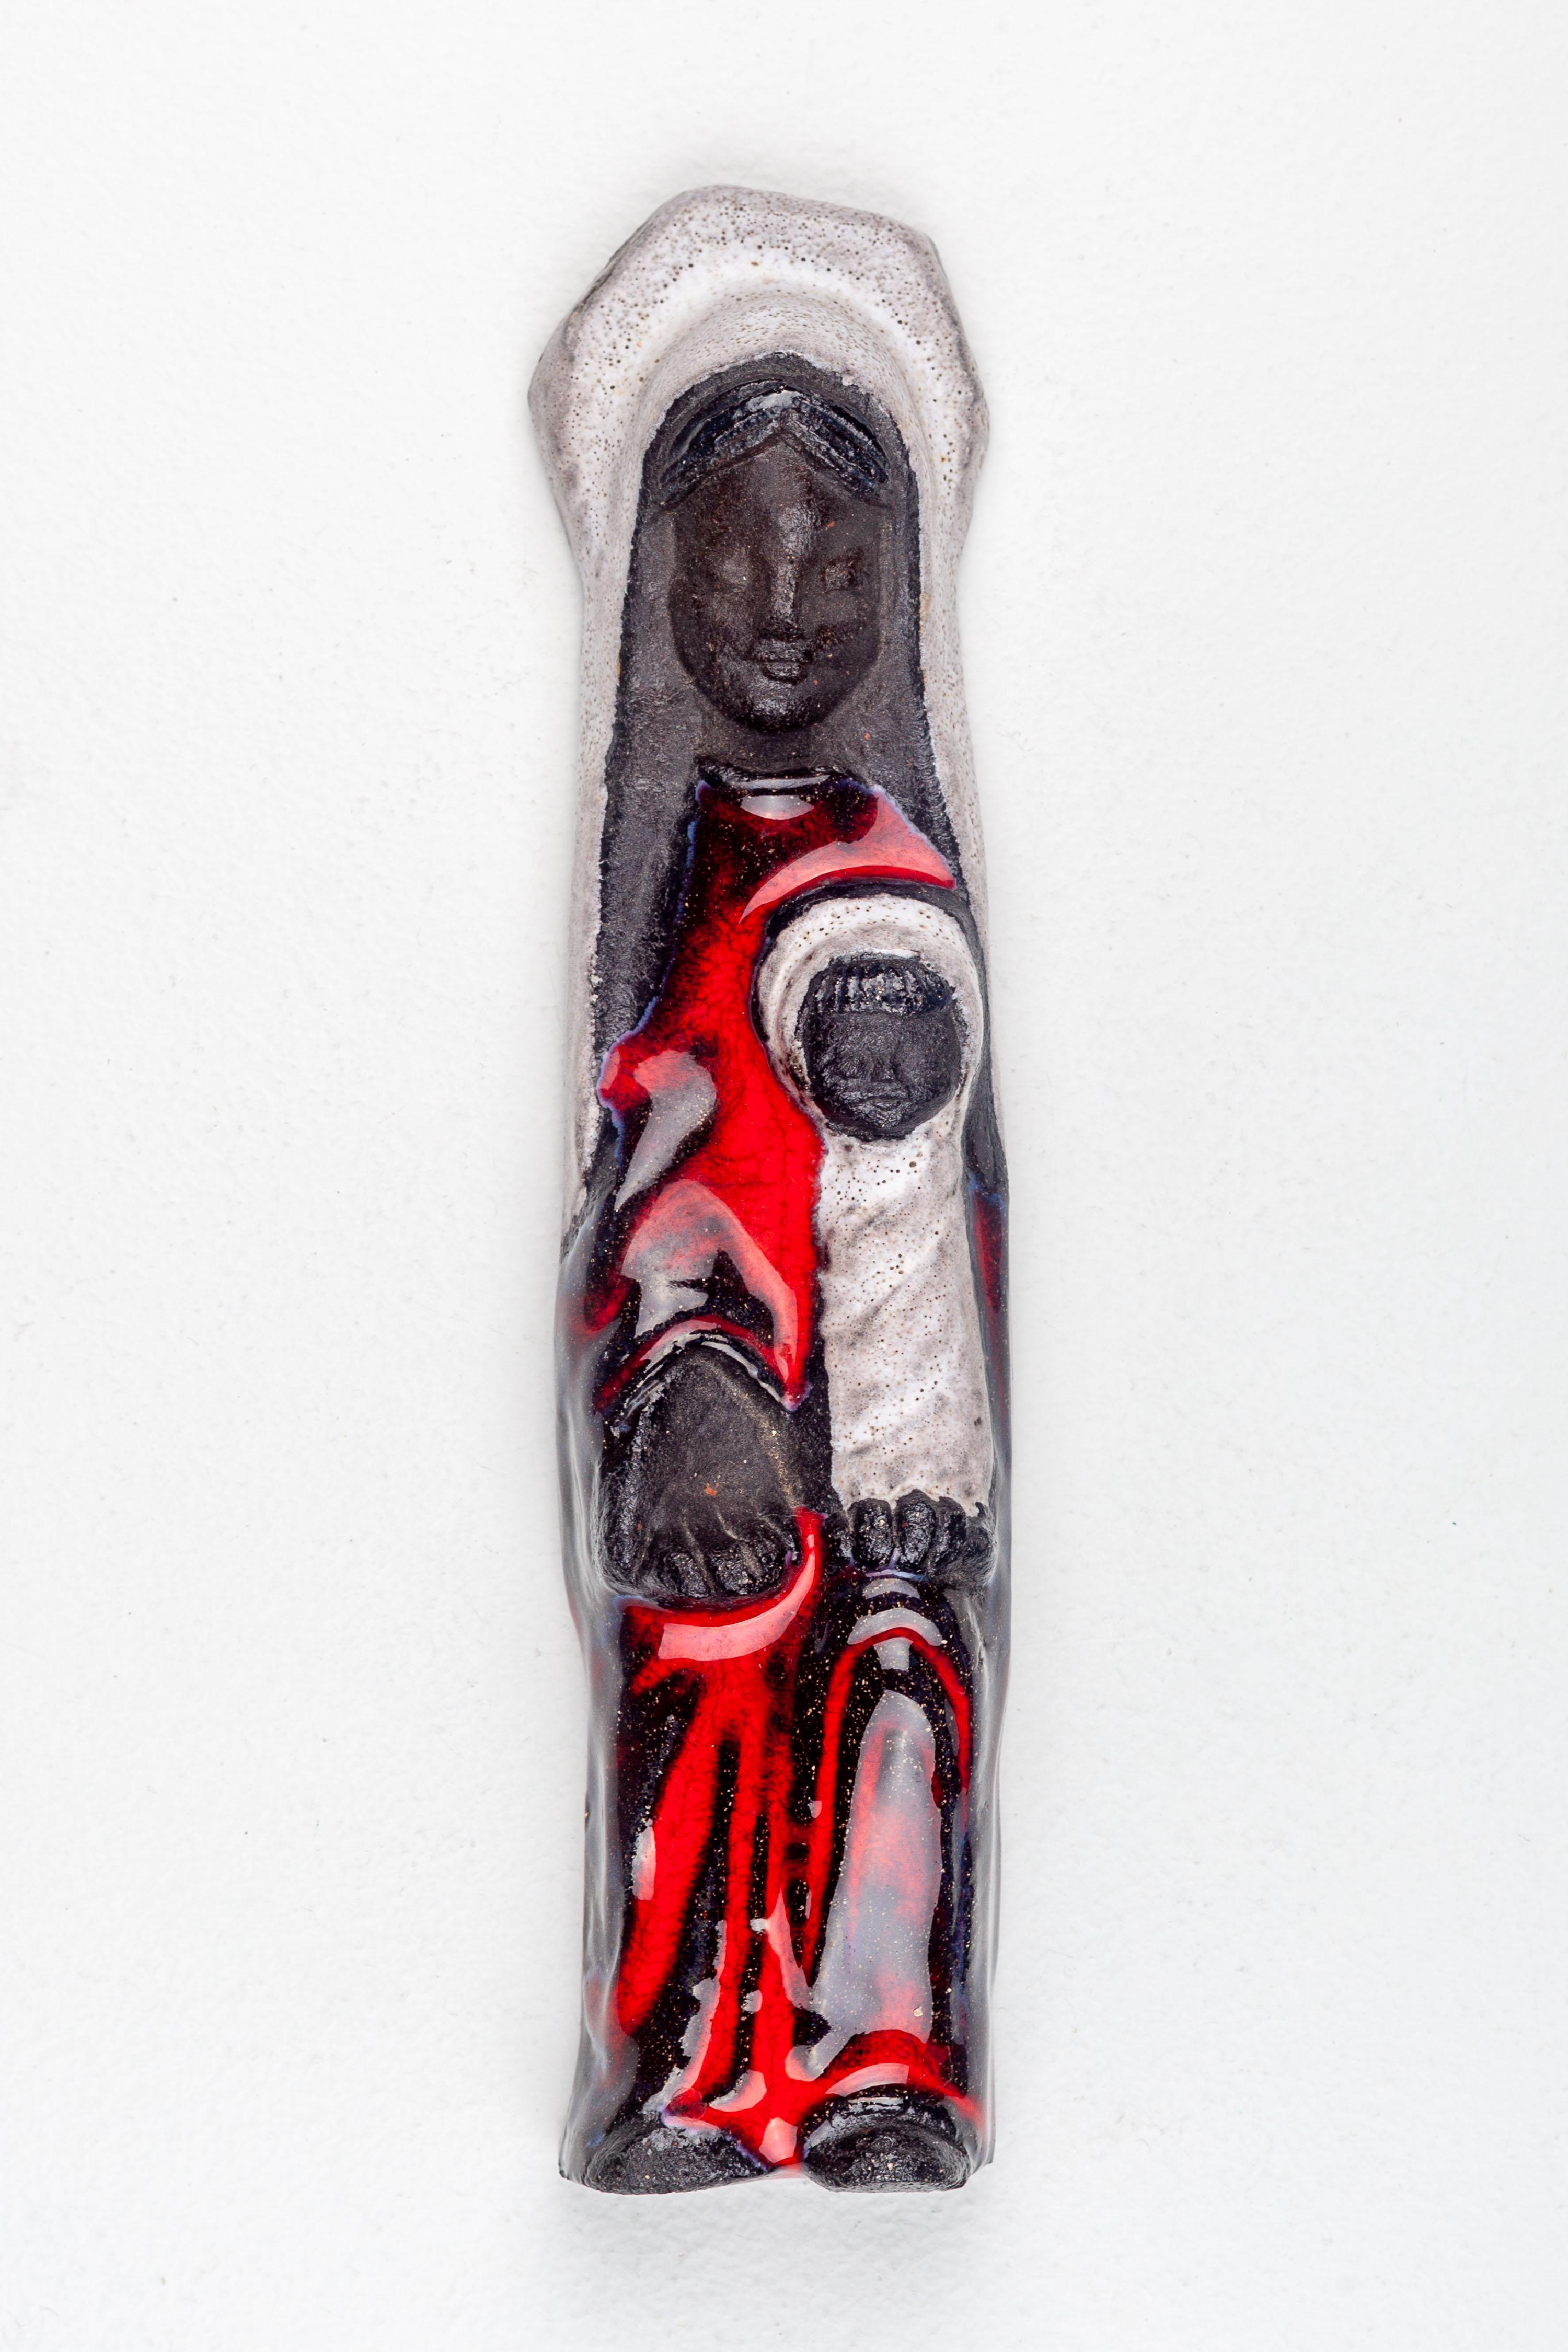 Midcentury Brutalist Depiction of the Virgin Mary and Child Jesus, Handcrafted in European Studio Pottery. In this depiction, the Virgin Mary is represented as a smiling figure in black, adorned with a glossy red robe. Meanwhile, the Child Jesus is